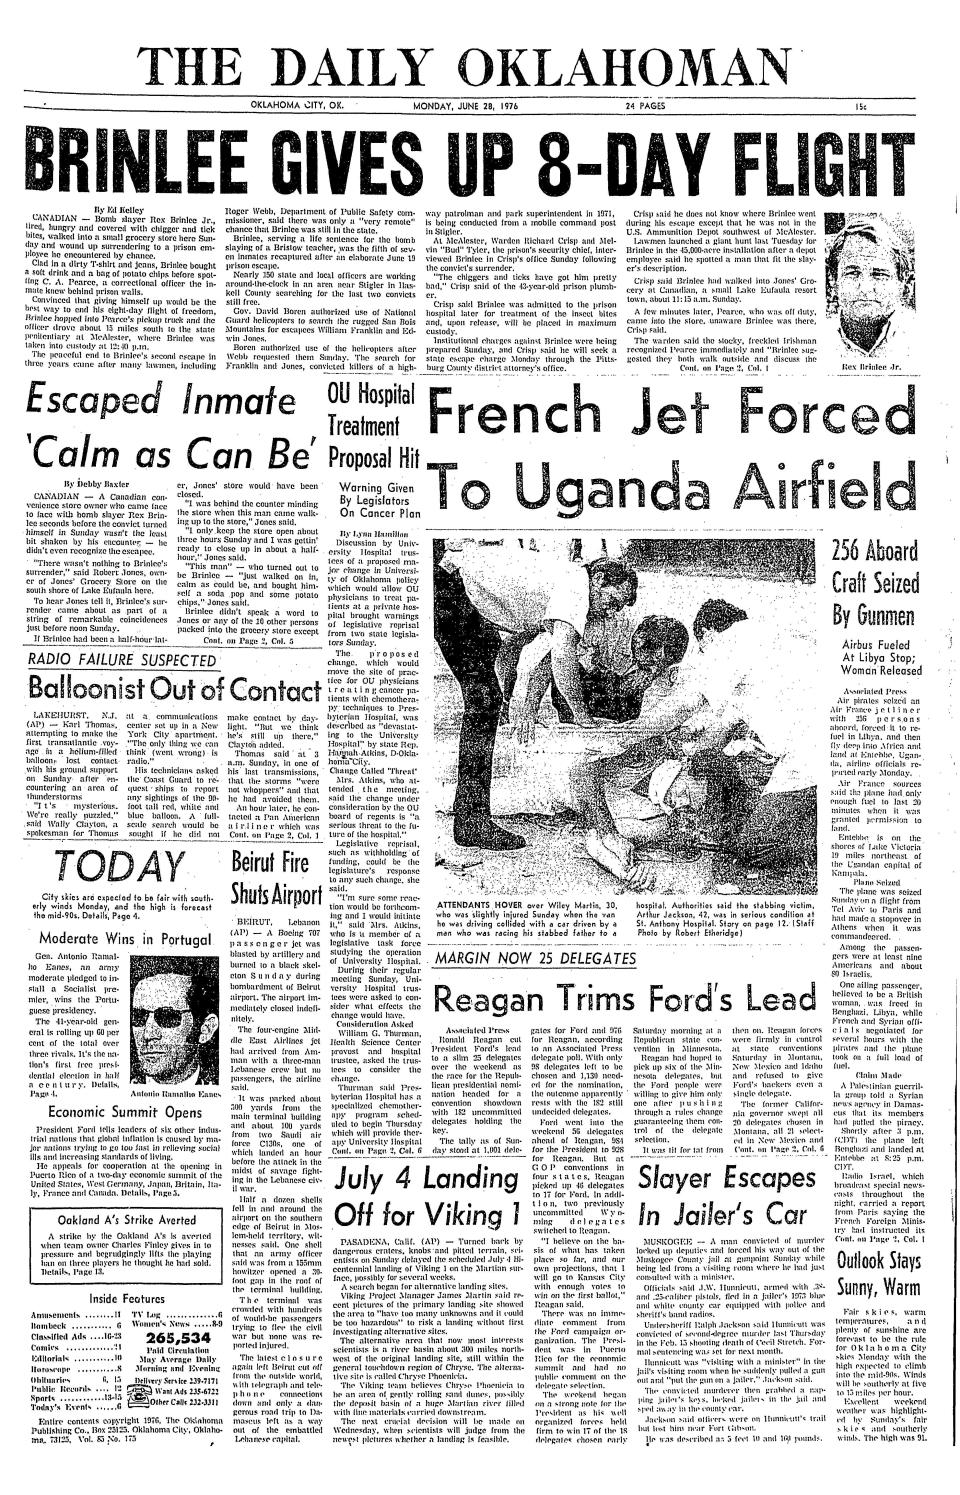 The head "BRINLEE GIVES UP 8-DAY FLIGHT" spread across the top of the June 28, 1976 edition of The Daily Oklahoman.